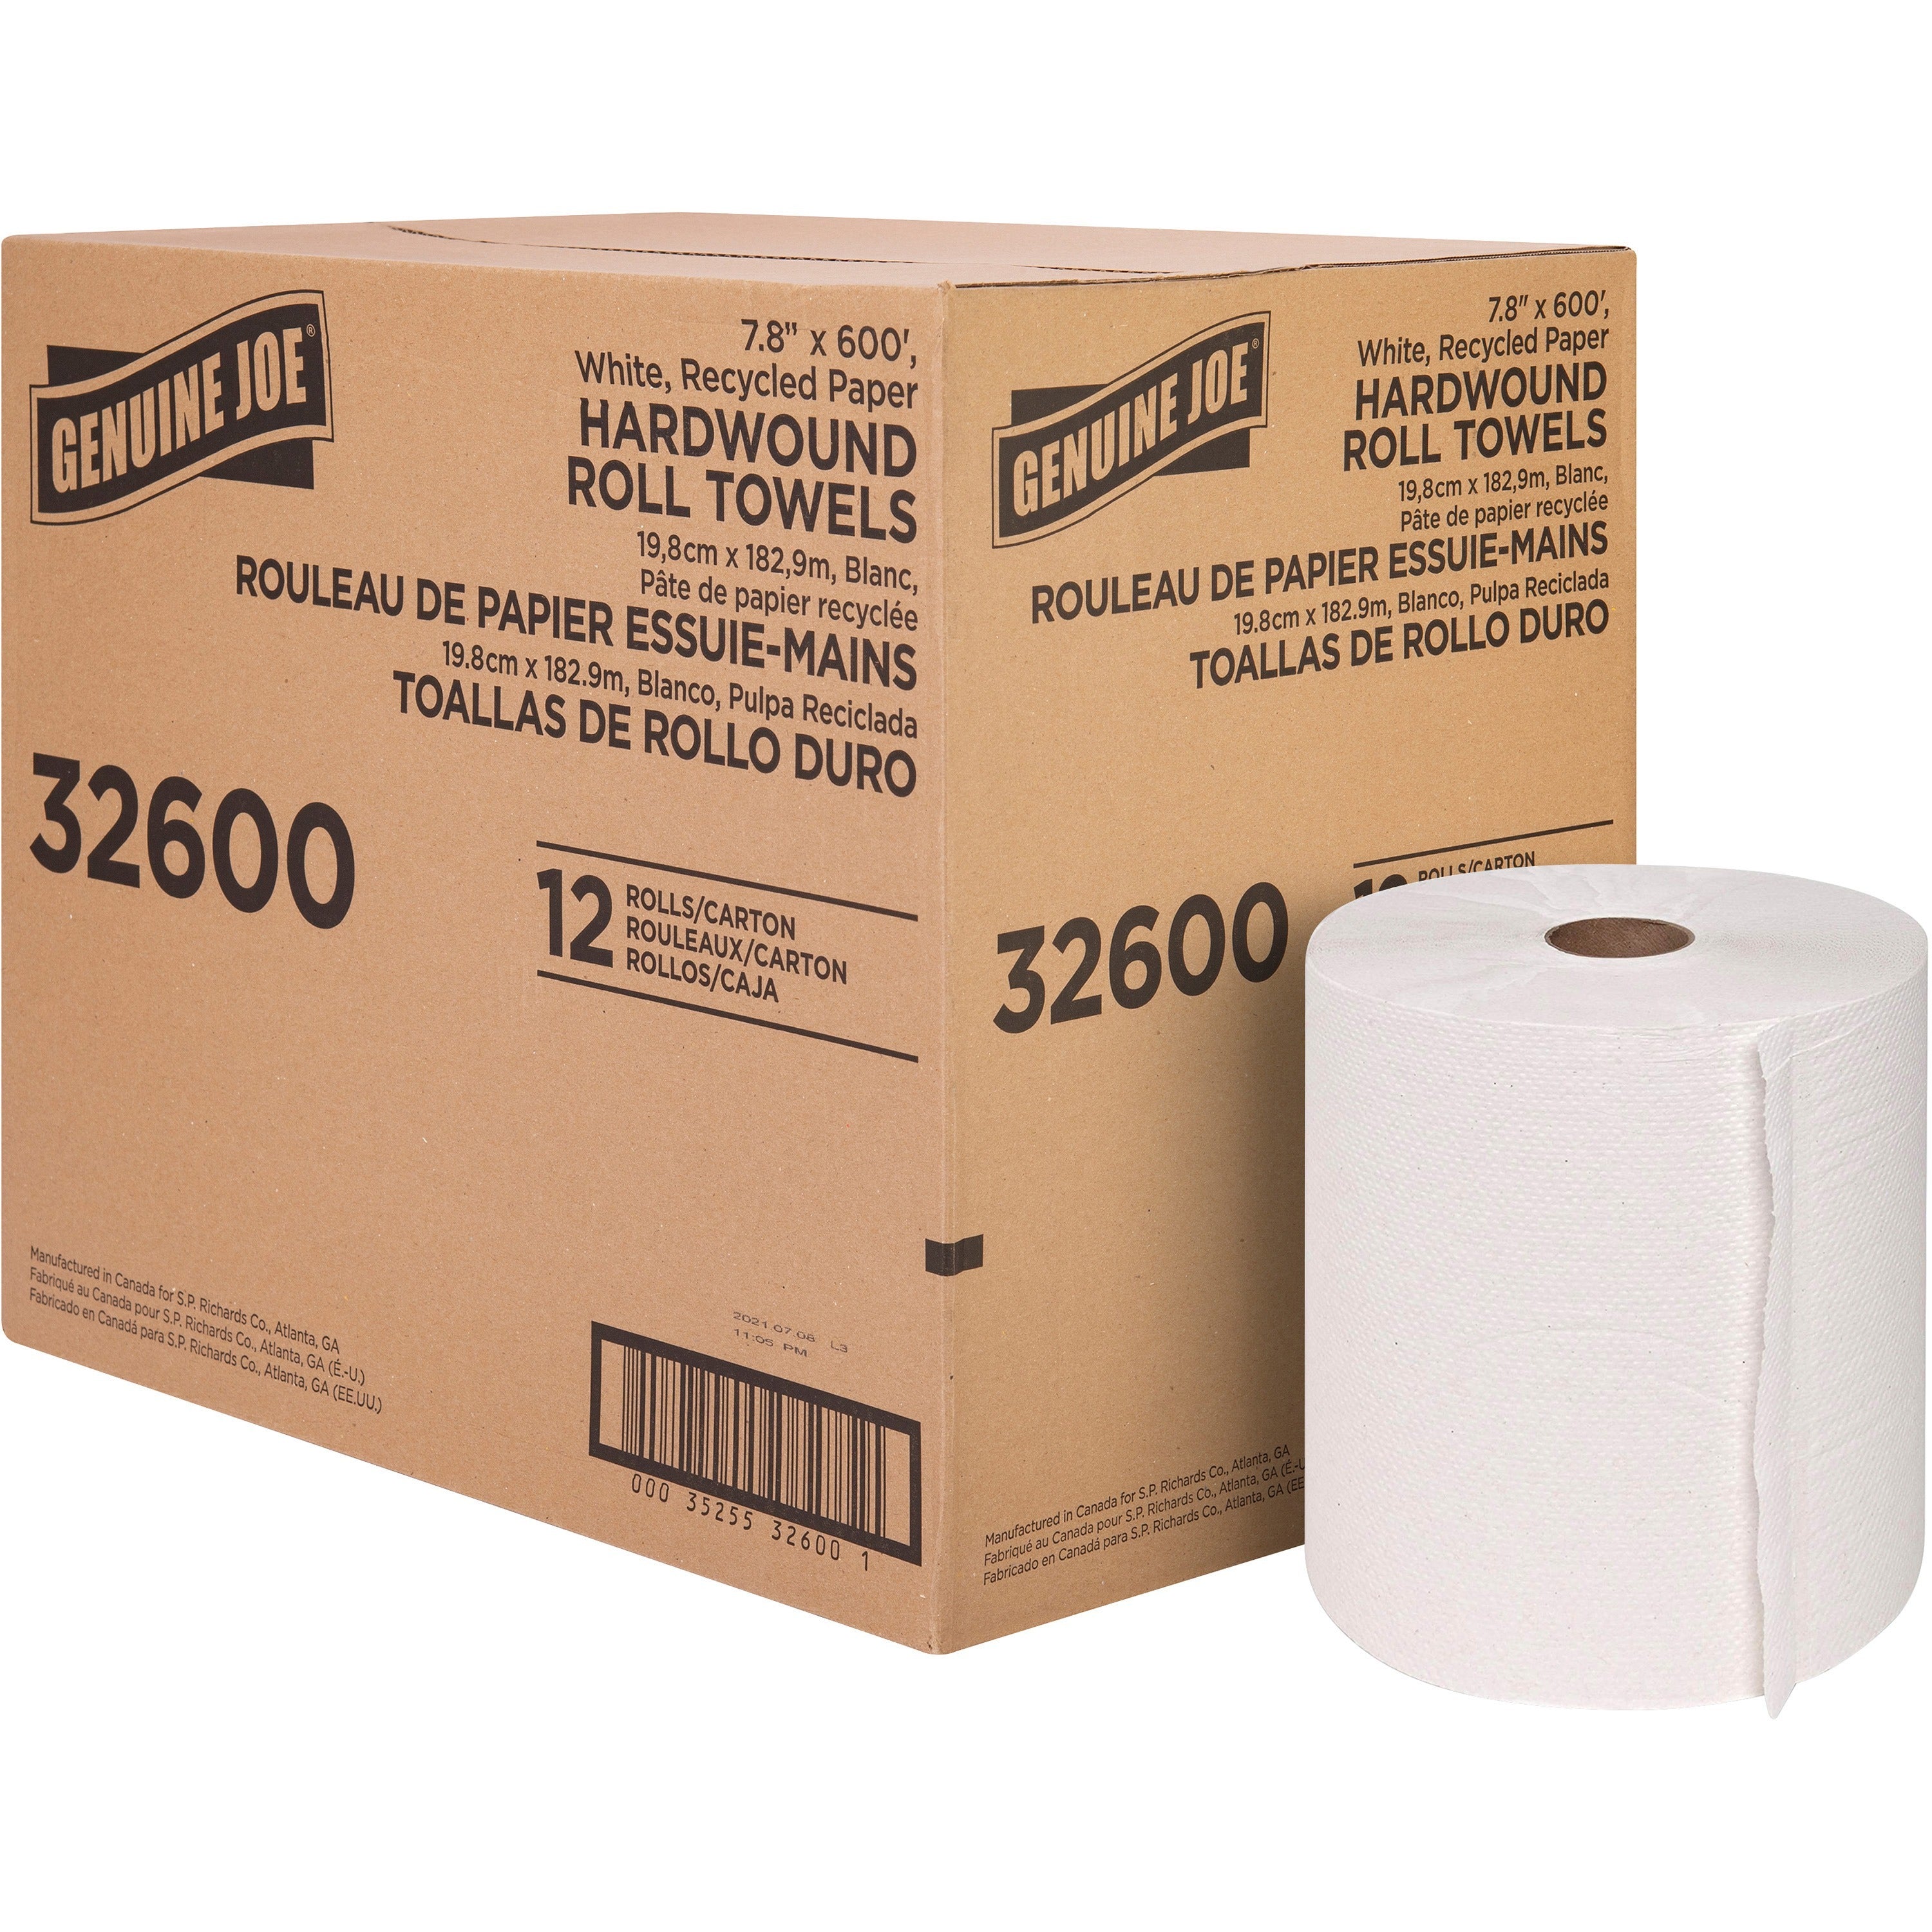 genuine-joe-hardwound-roll-paper-towels-780-x-600-ft-2-core-white-paper-absorbent-for-restroom-12-carton_gjo32600 - 1